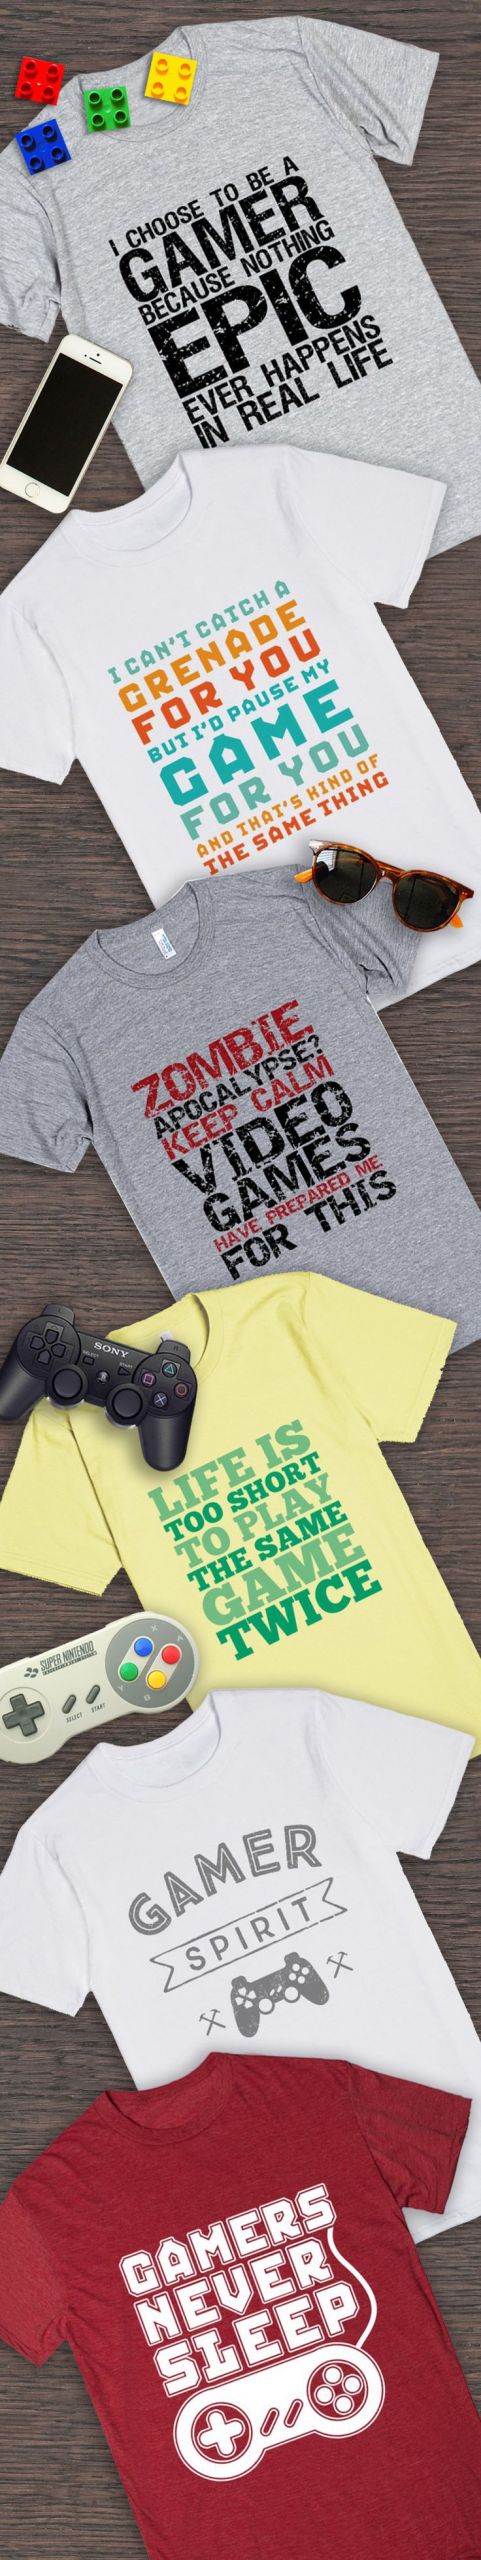 Gift Ideas For Nerdy Boyfriend
 Funny and cool t shirt for geek and gamer Gift ideas for